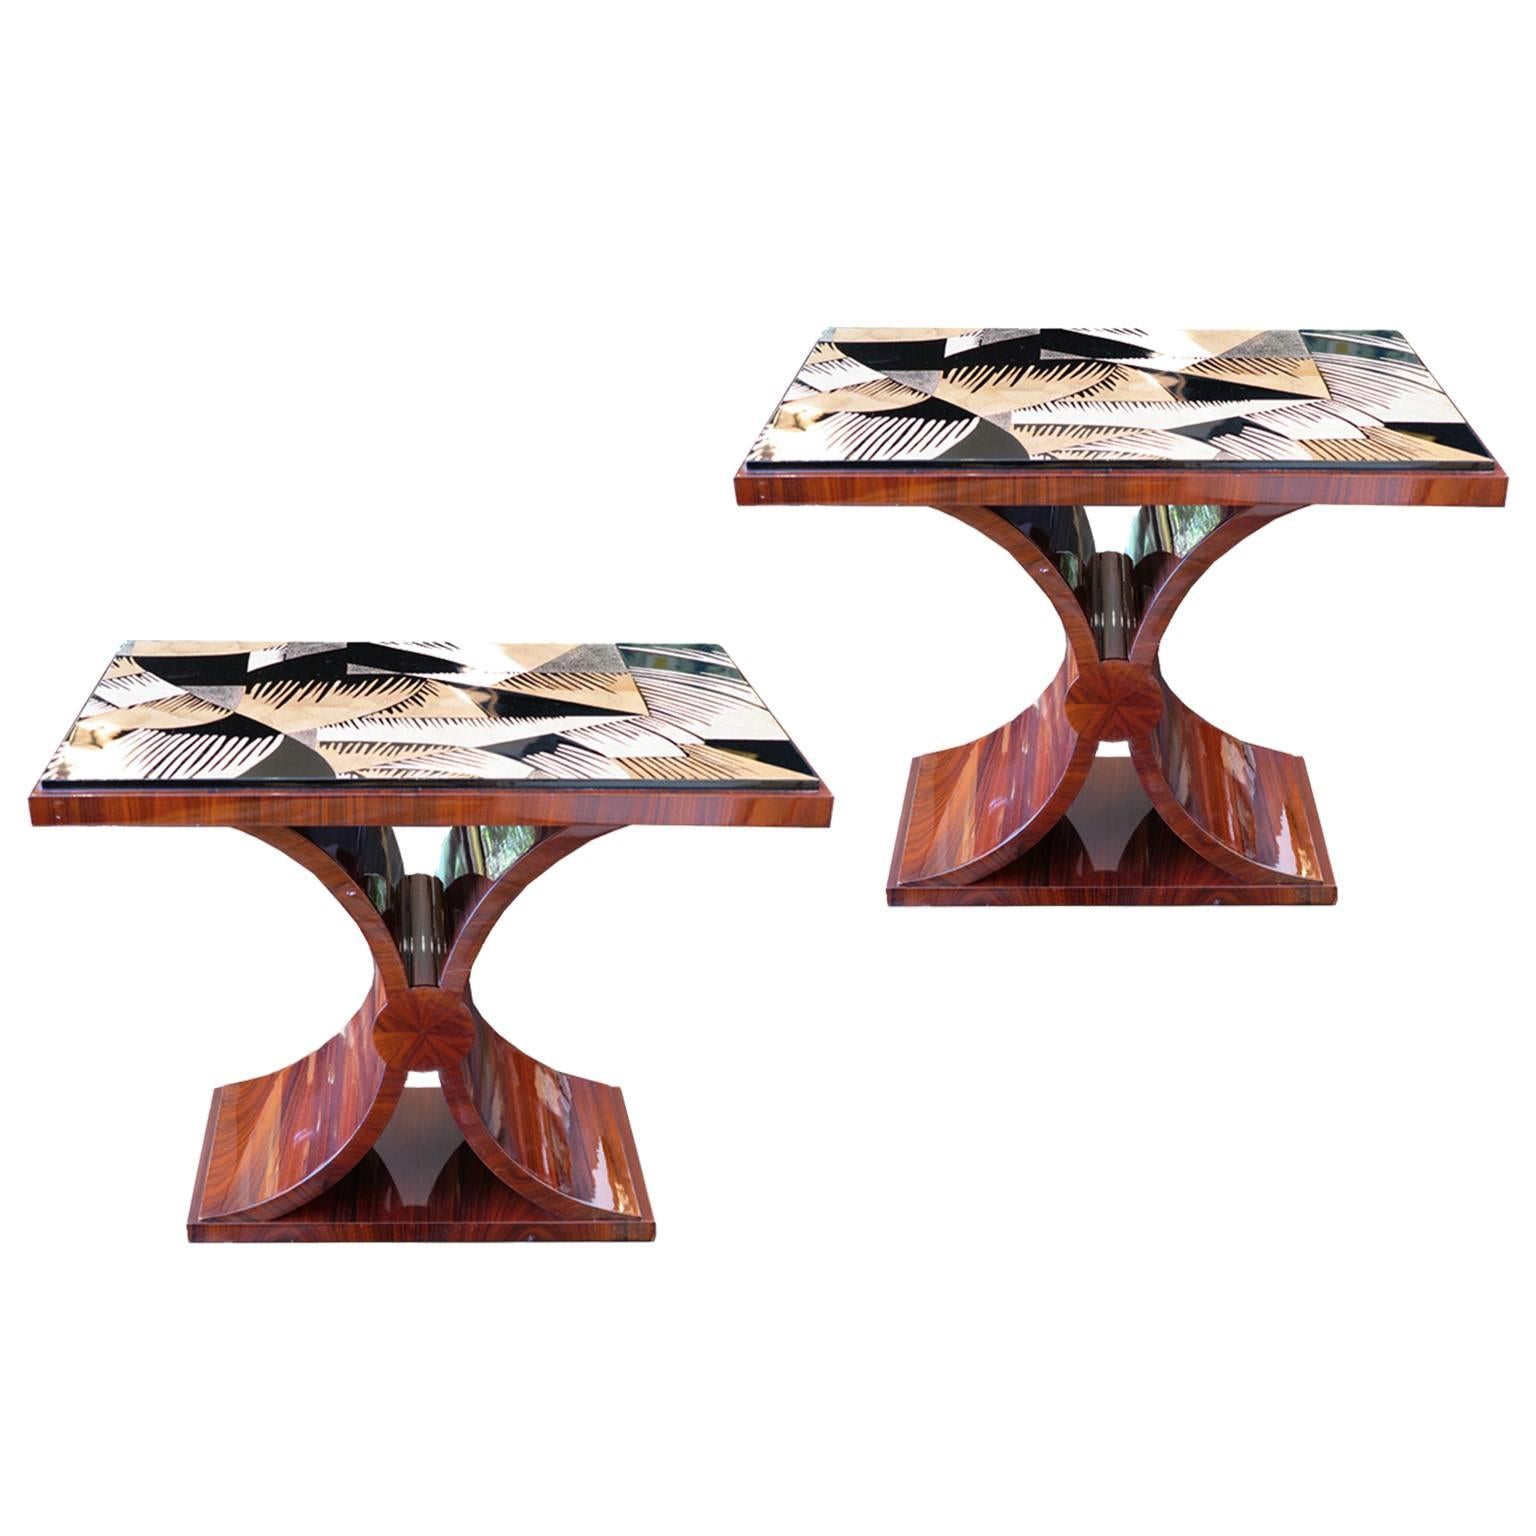 Iconic pair of side tables in the style of Art Deco. Featuring a lacquered rosewood base with an intricate and geometric eggshell inlaid top. Curved base in the shape of an x.